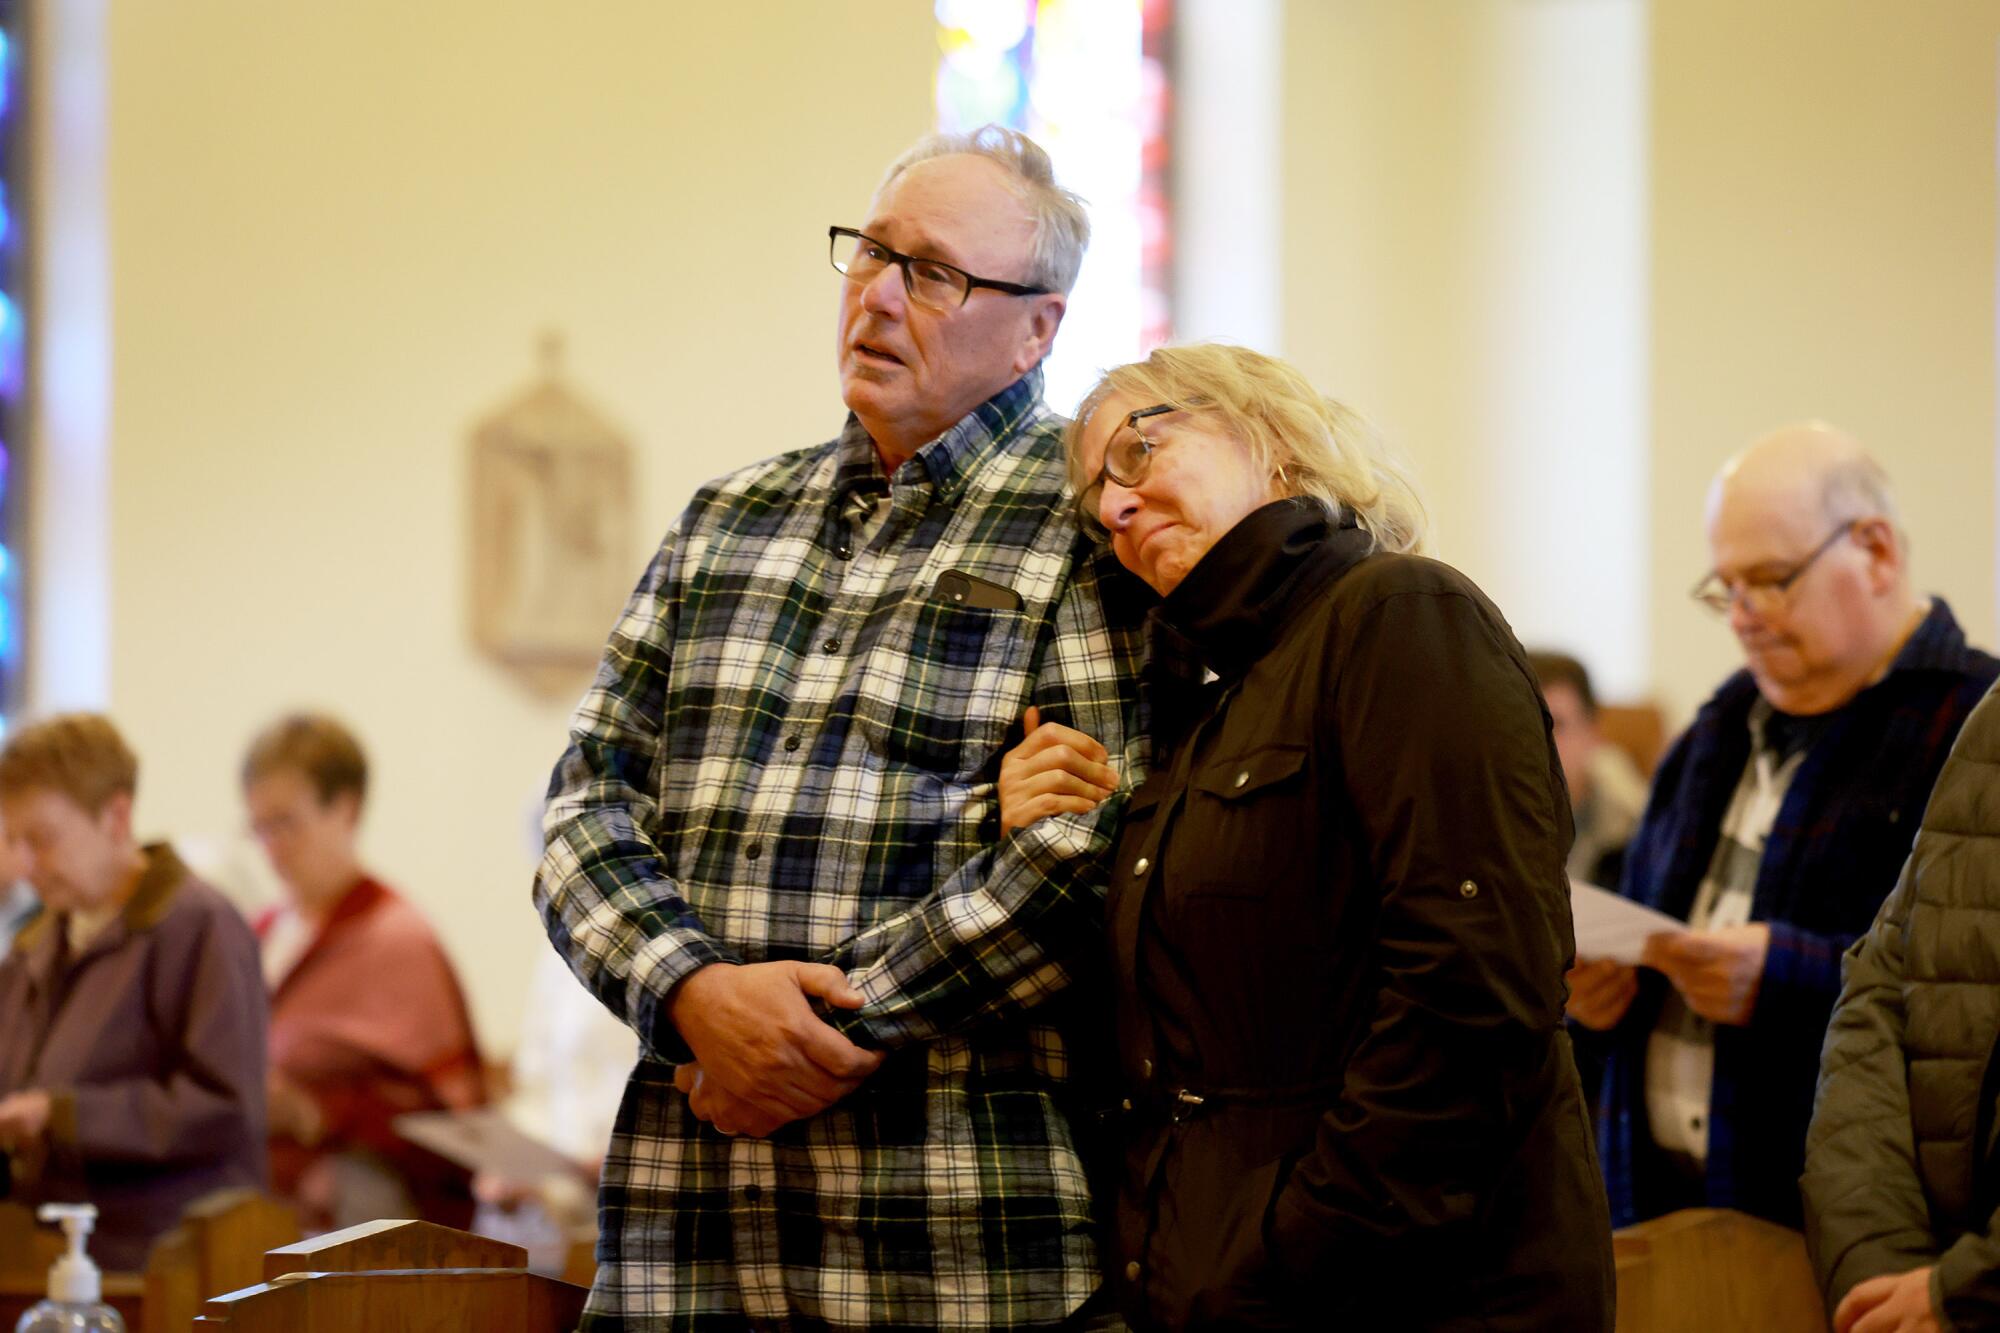 A woman rests her head on the shoulder of a man and holds his arm as they stand in the pews of a church